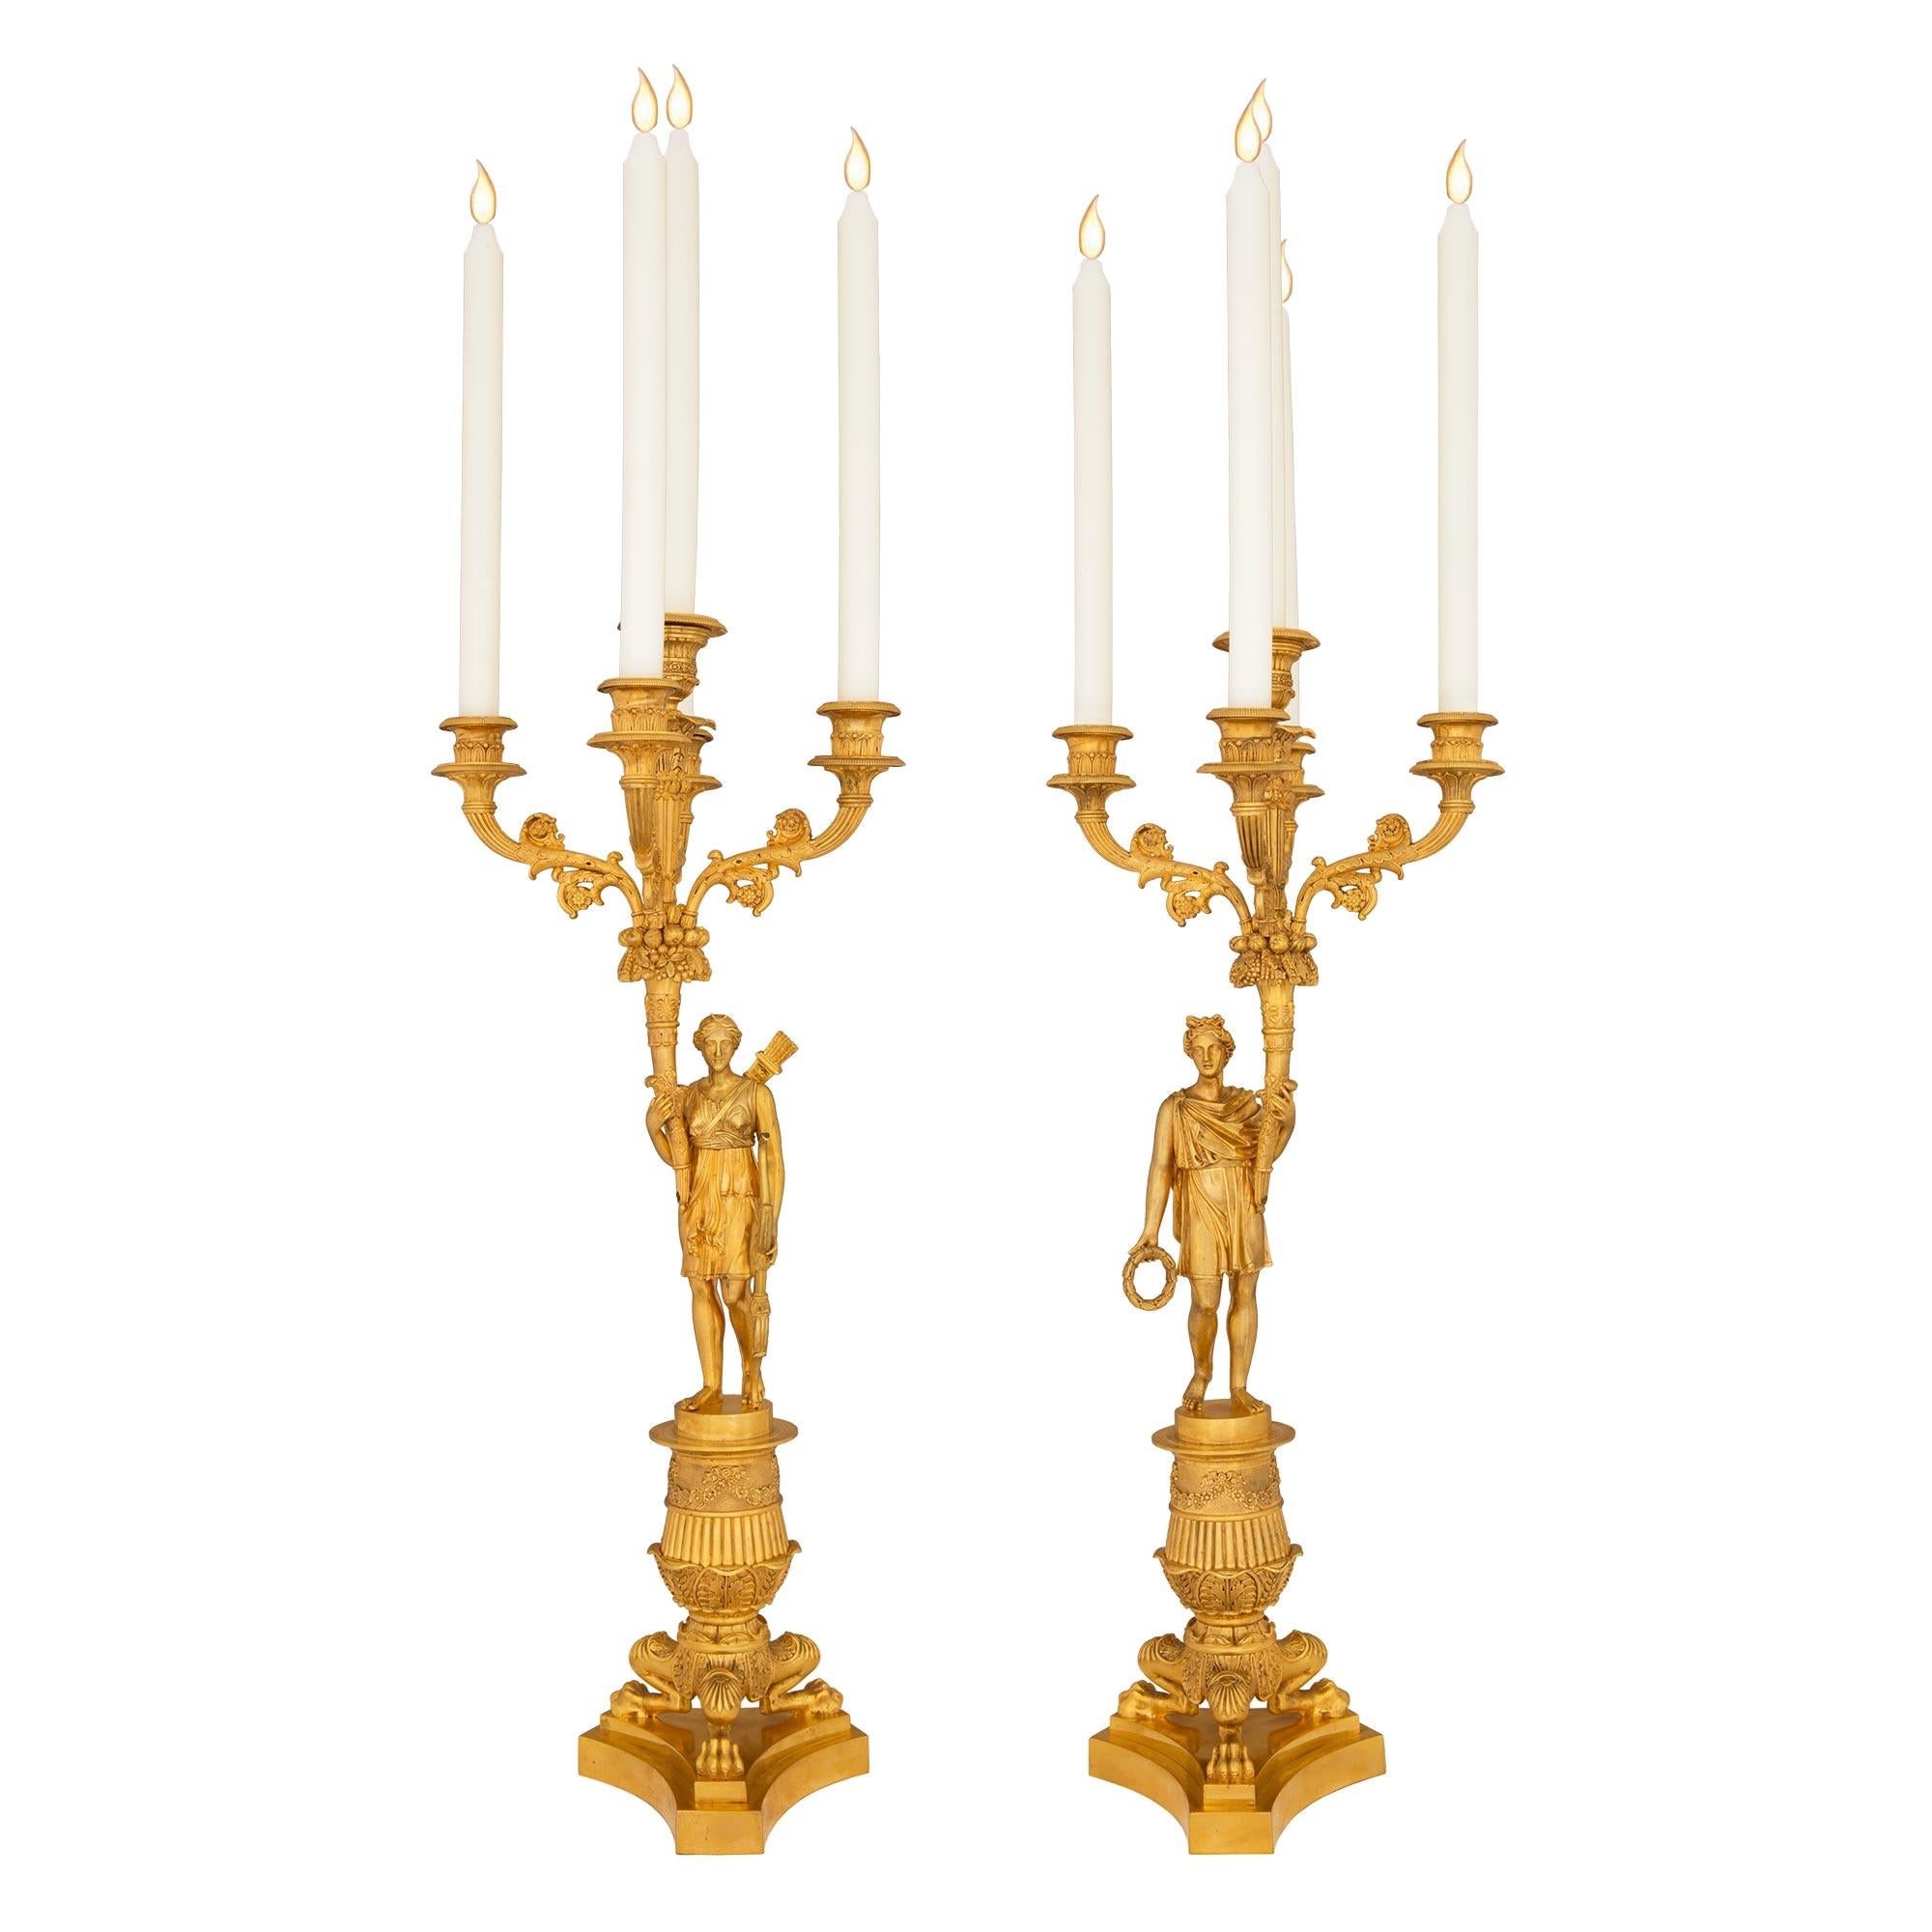 Pair of French Mid 19th Century Charles X Period Ormolu Candelabras